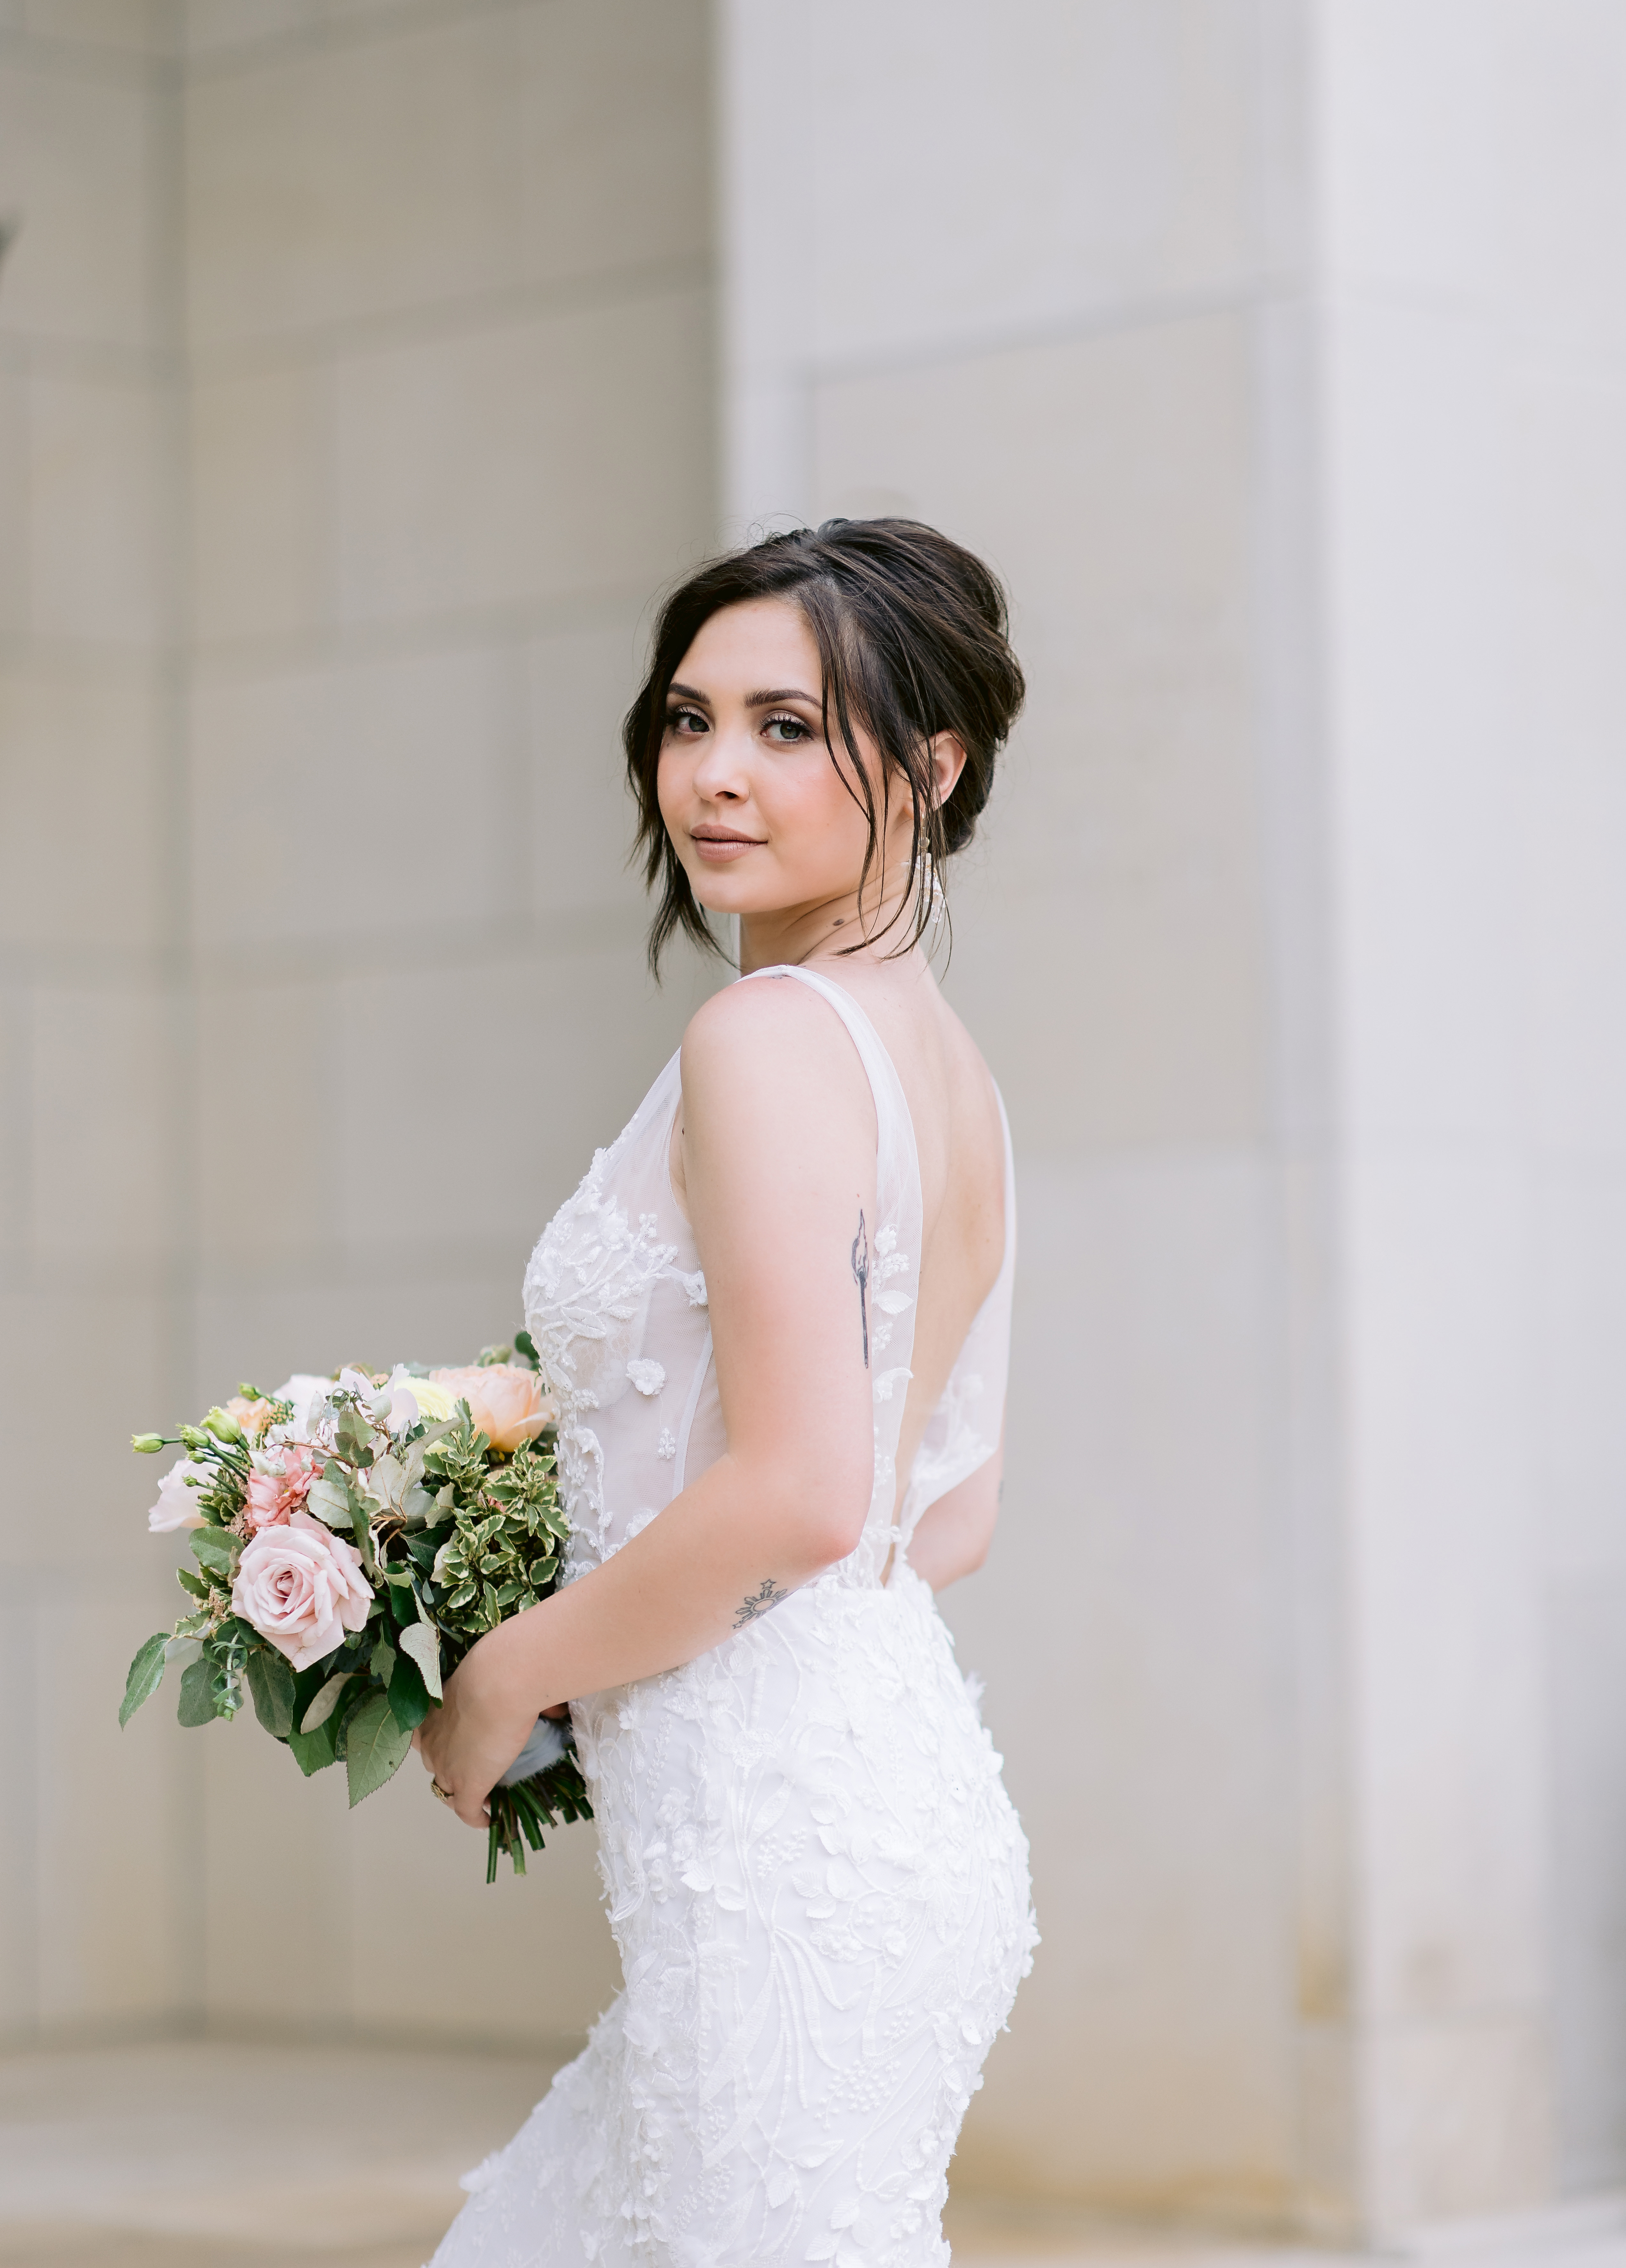 bridal portrait at the Olana Venue in Texas with Tatyana Zadorin Photography. Bride looking into the camera